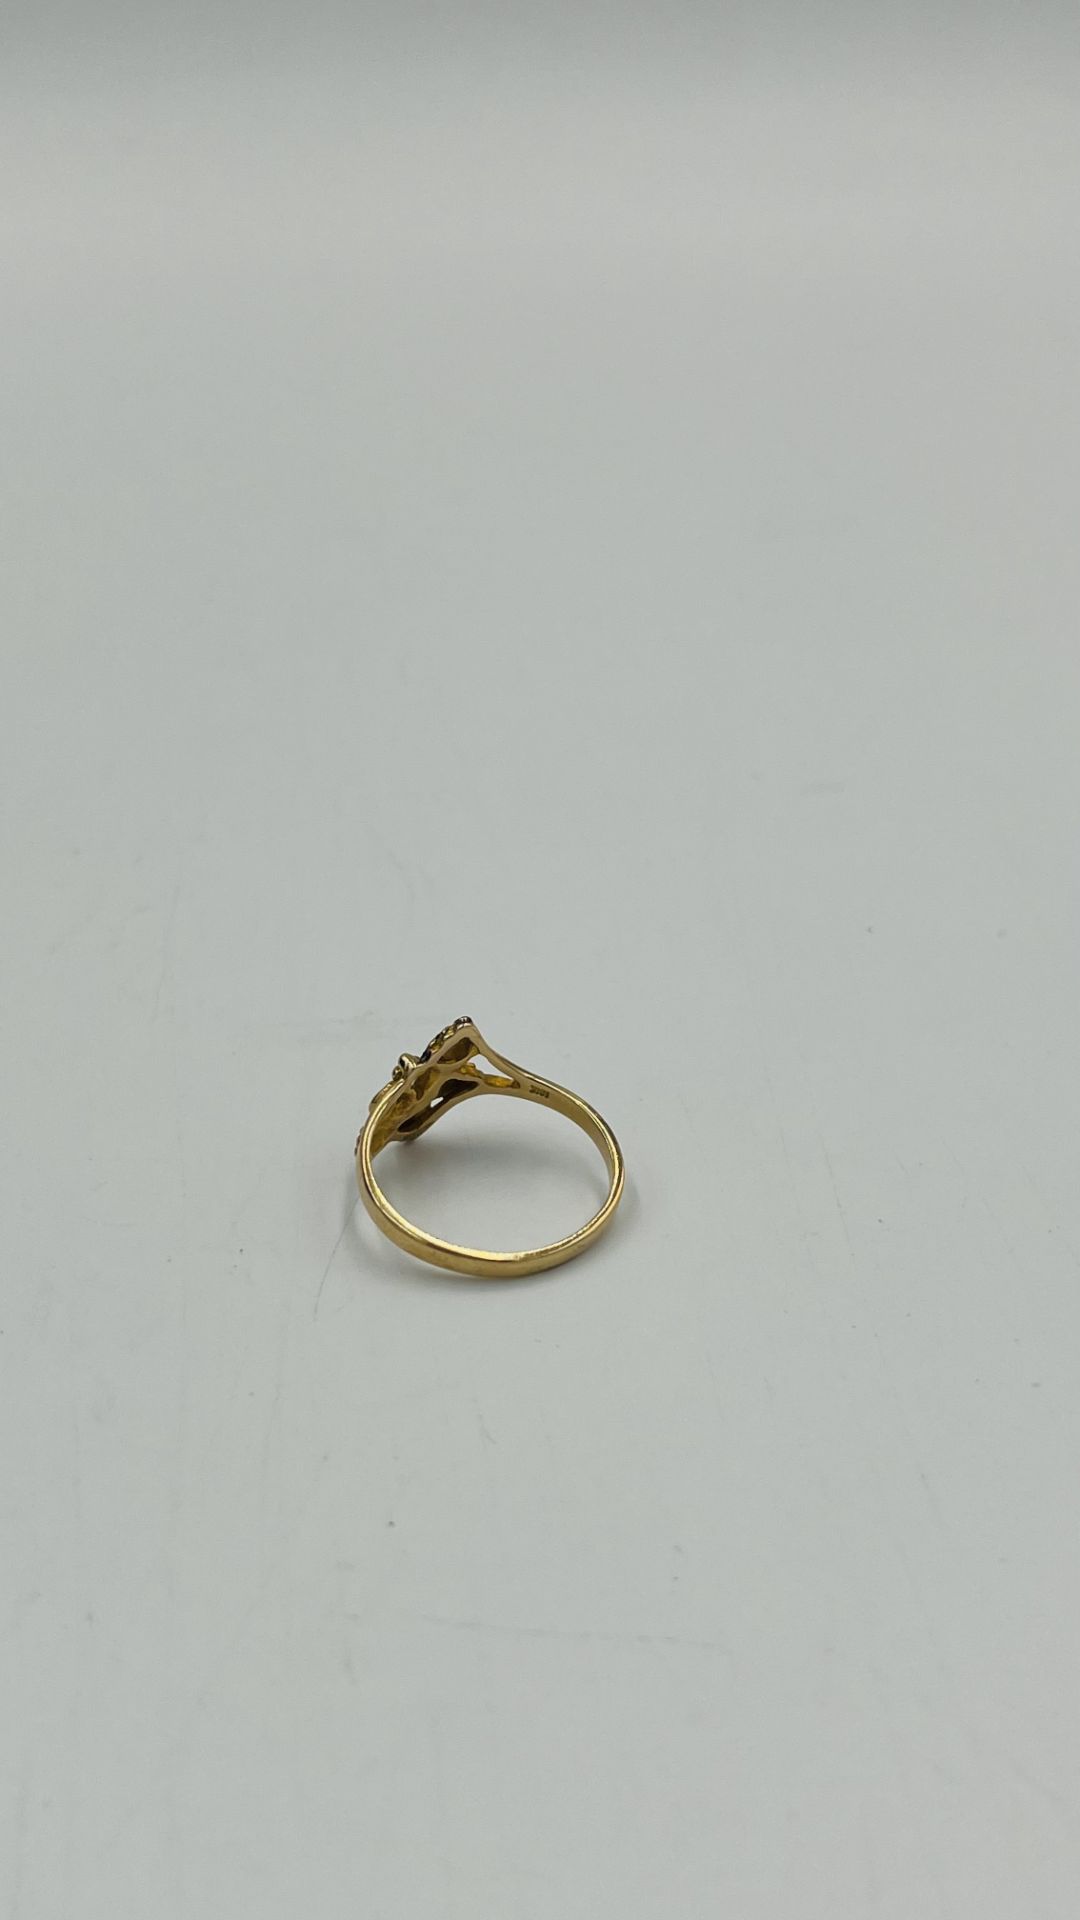 10ct gold ring together with a matching pair of 10ct gold earrings - Image 5 of 6